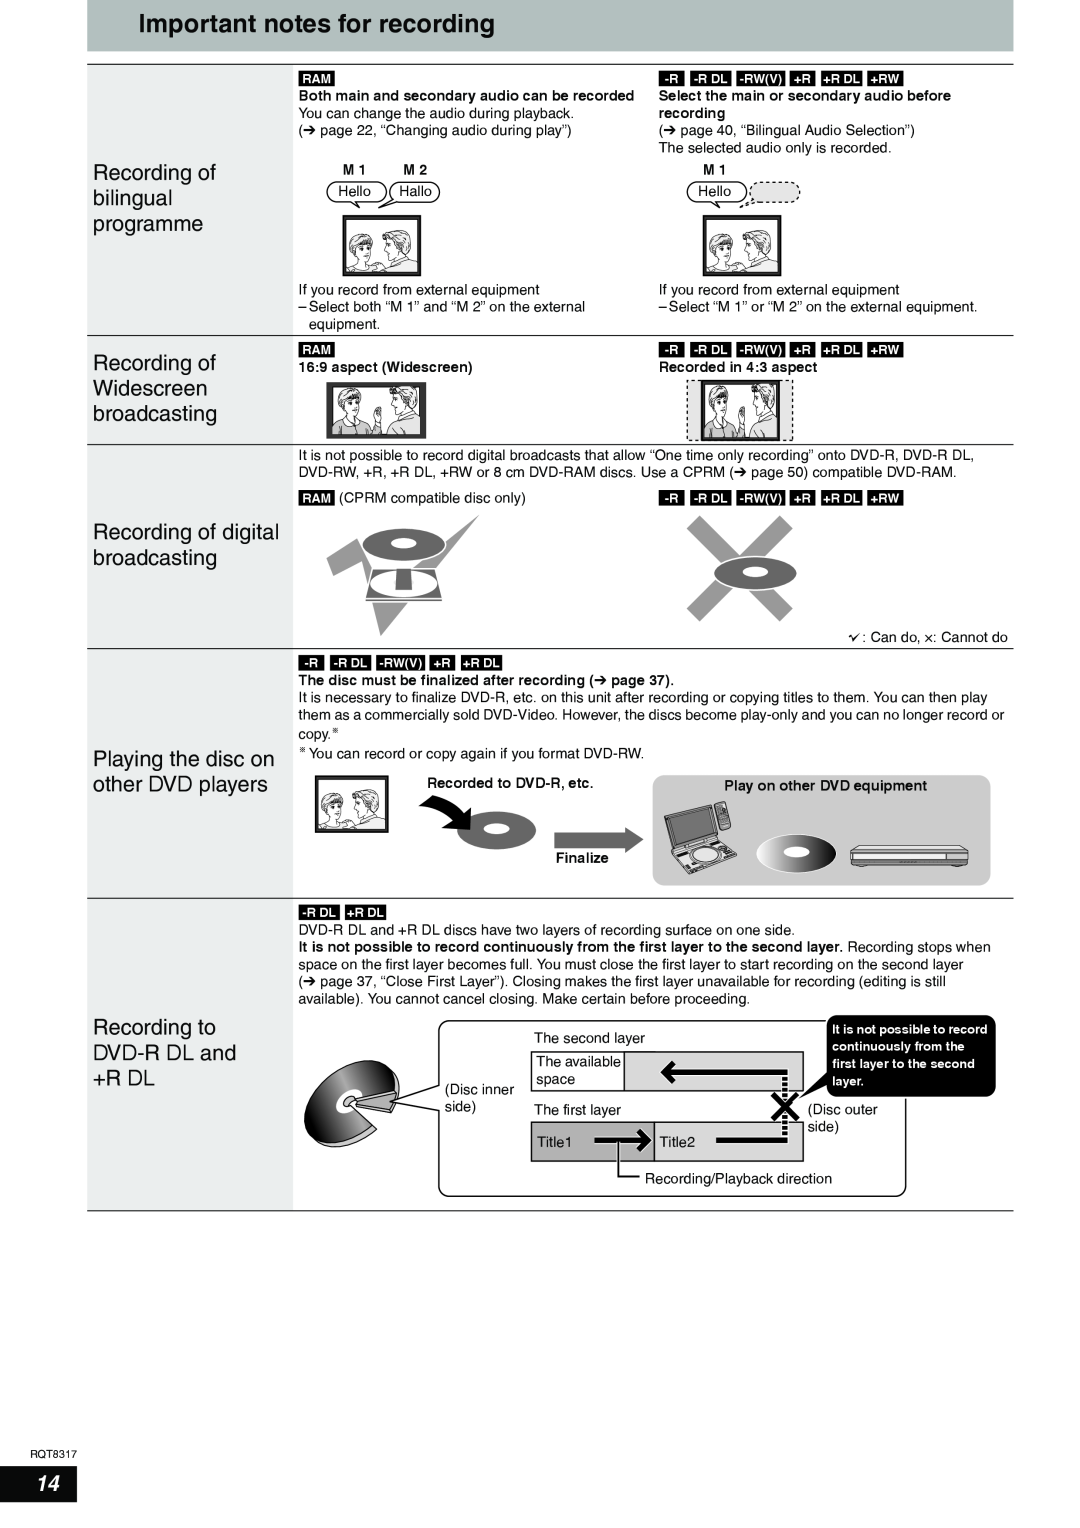 Panasonic DMR-ES15 manual Important notes for recording, Both main and secondary audio can be recorded, aspect Widescreen 